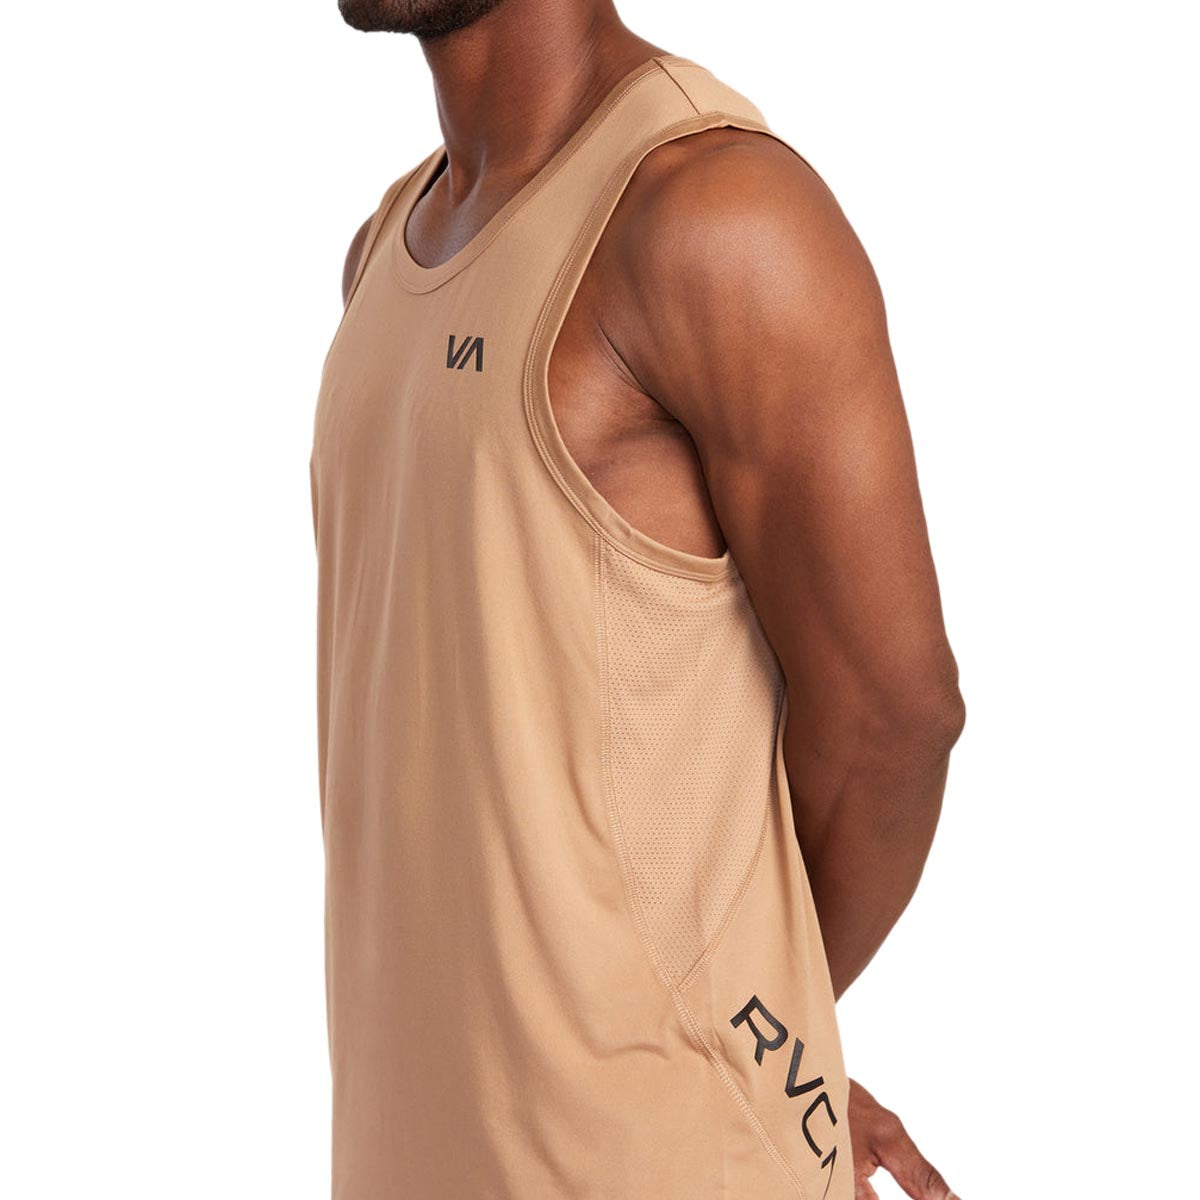 RVCA Sport Vent Sleeve Tank Top - Earth Clay image 5